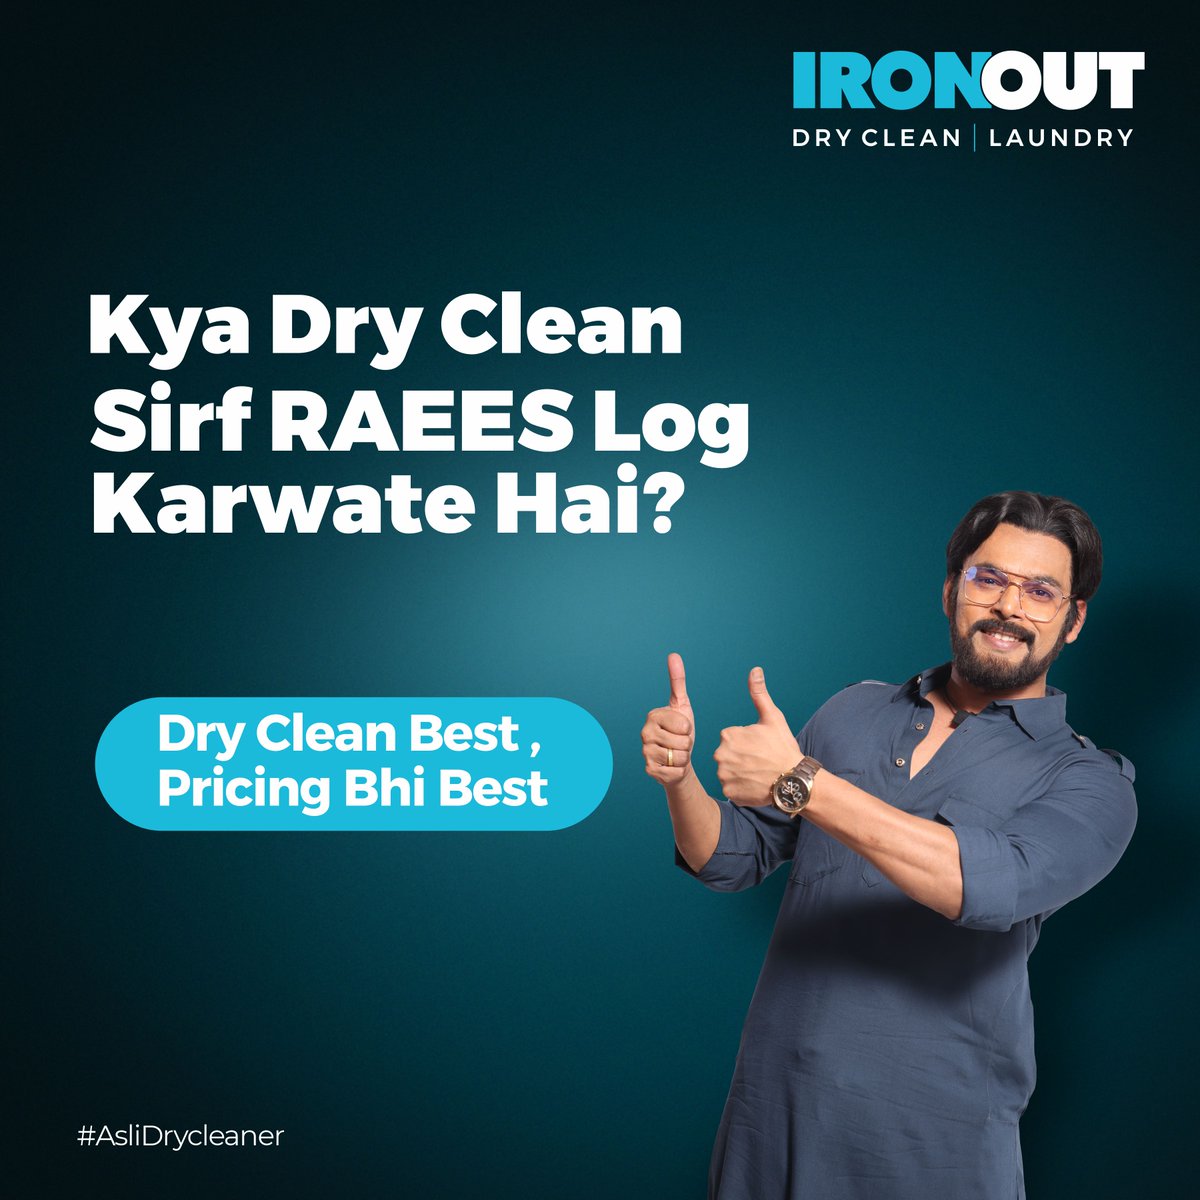 Dry cleaning services are a luxury that only the ‘RAEES” people can indulge in, and that too with the convenience of having their clothes delivered right to their doorsteps!
📞 Dial:  +91 931 0000 576
.
.
.
#ProfessionalDryCleaning #DryCleaning #DoorstepDelivery #AsliDryCleaners